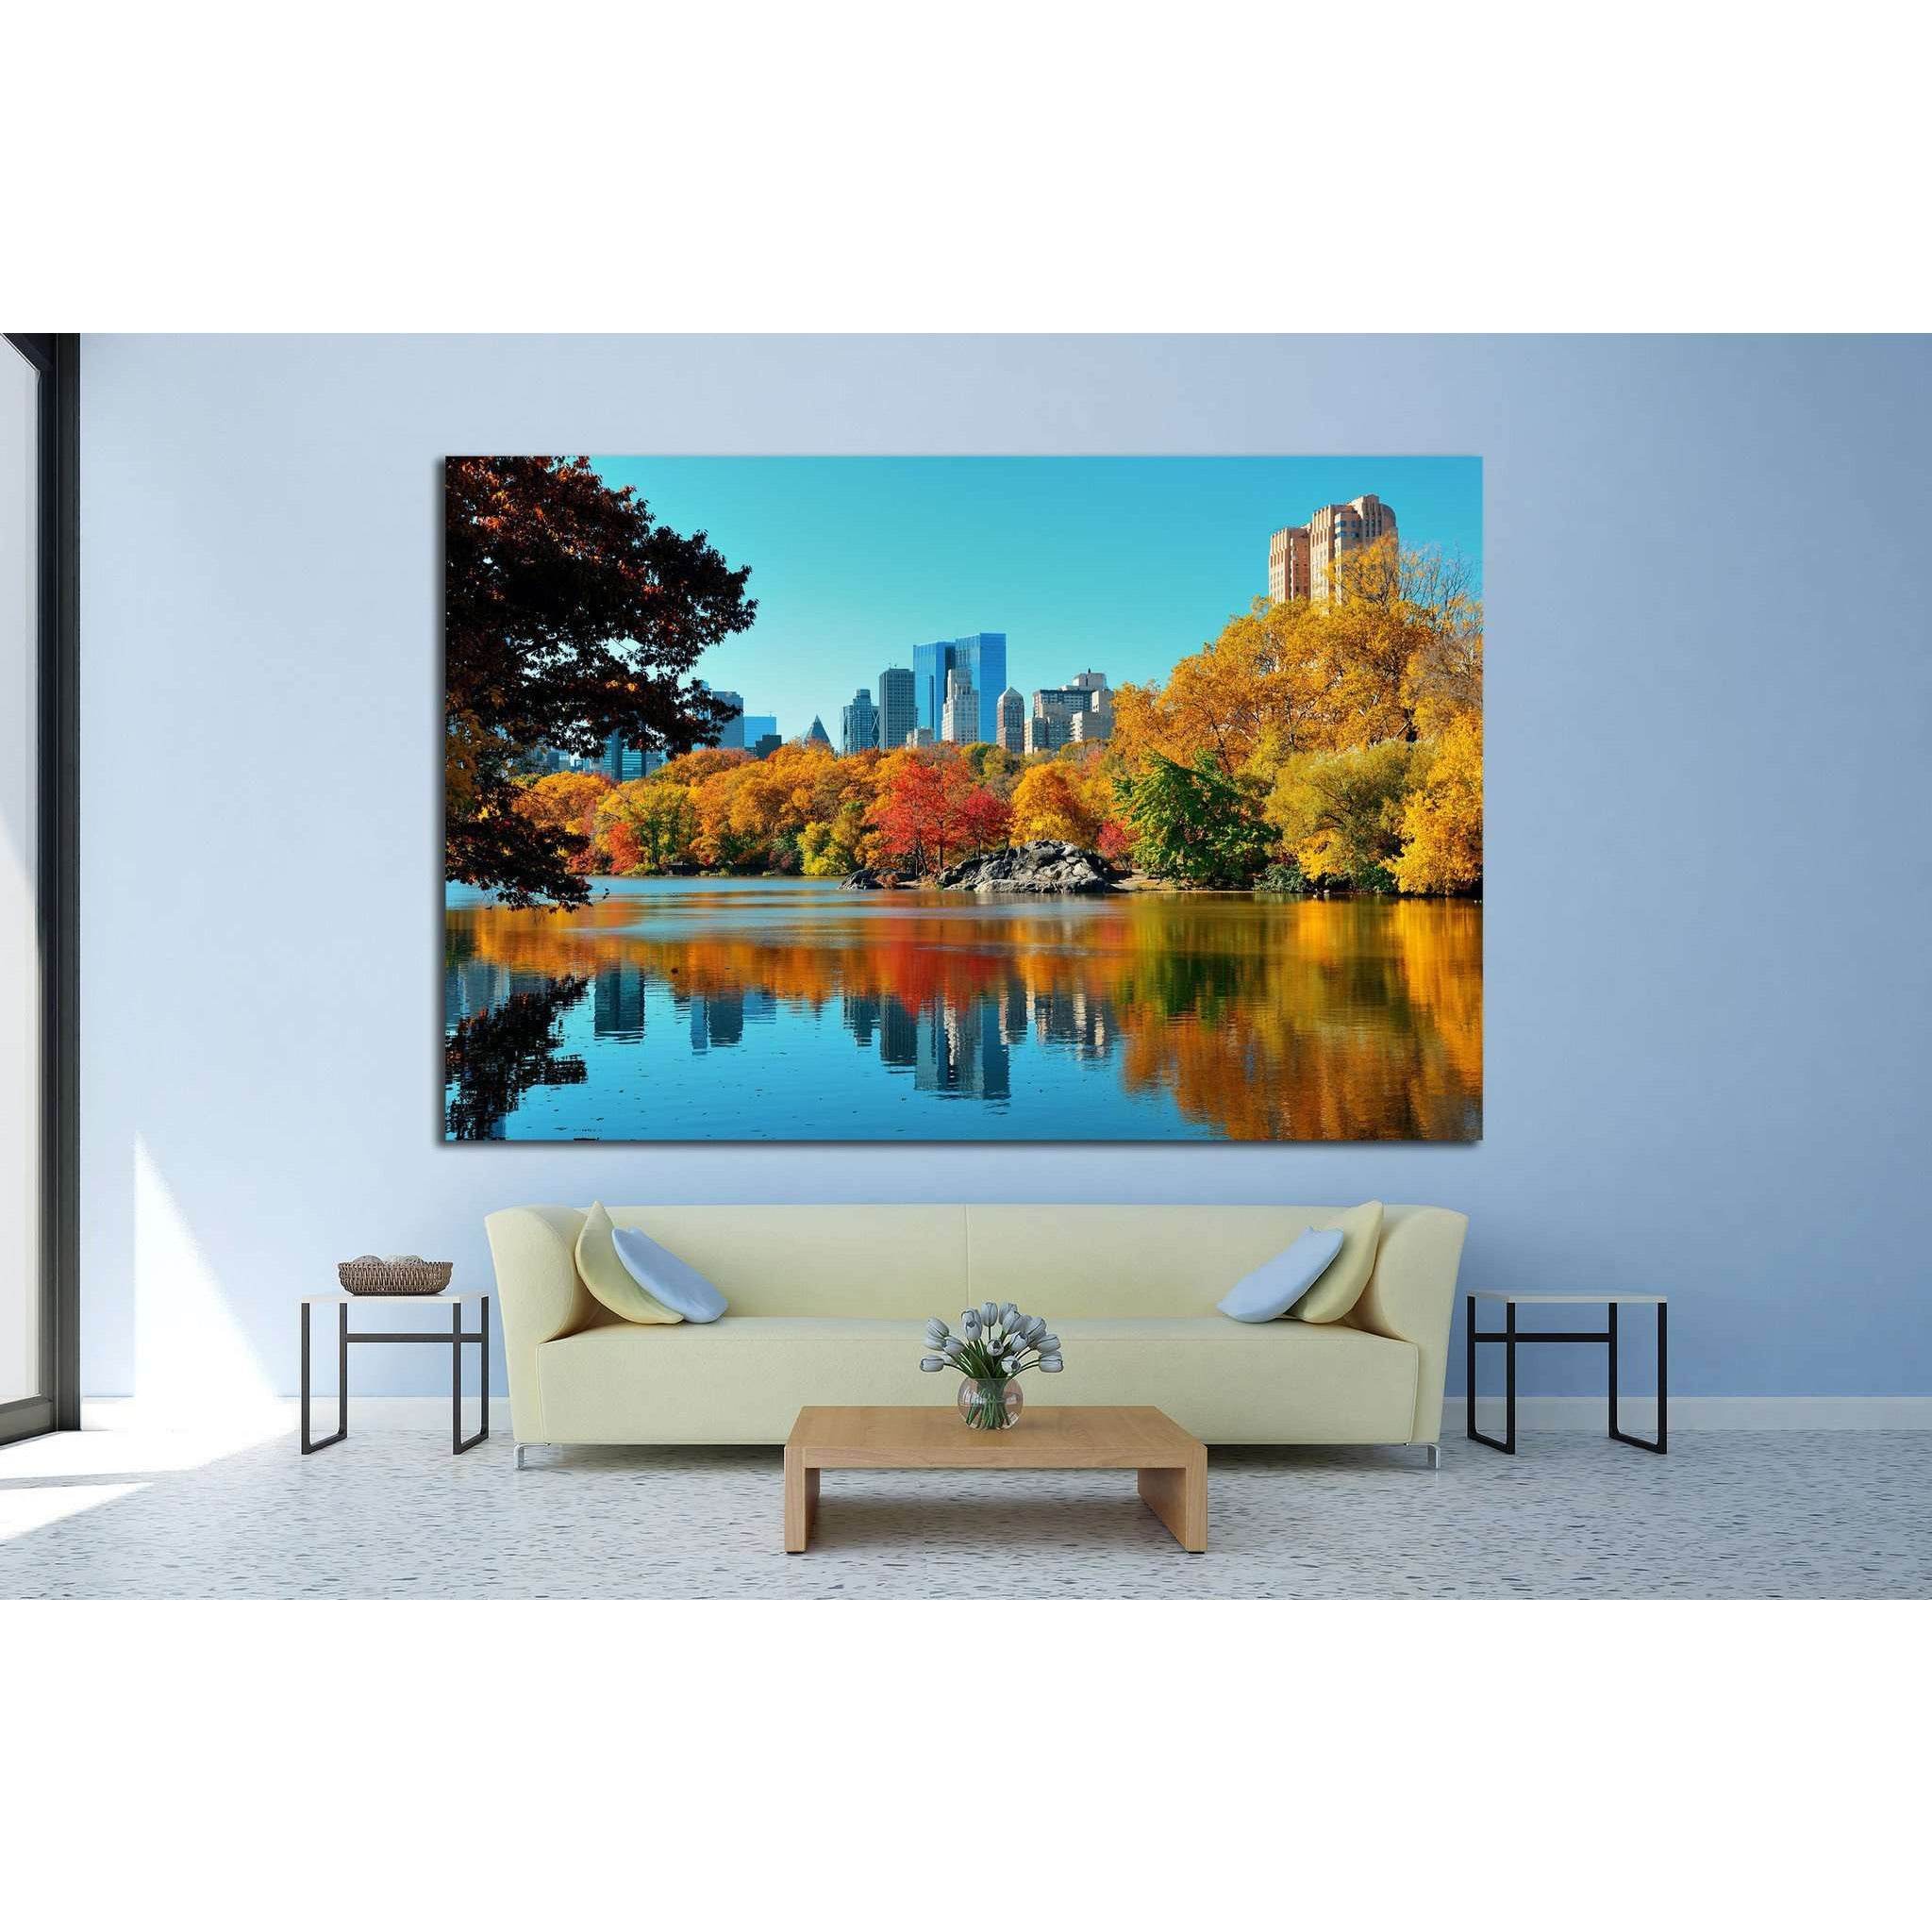 Central Park, New York №871 Ready to Hang Canvas Print